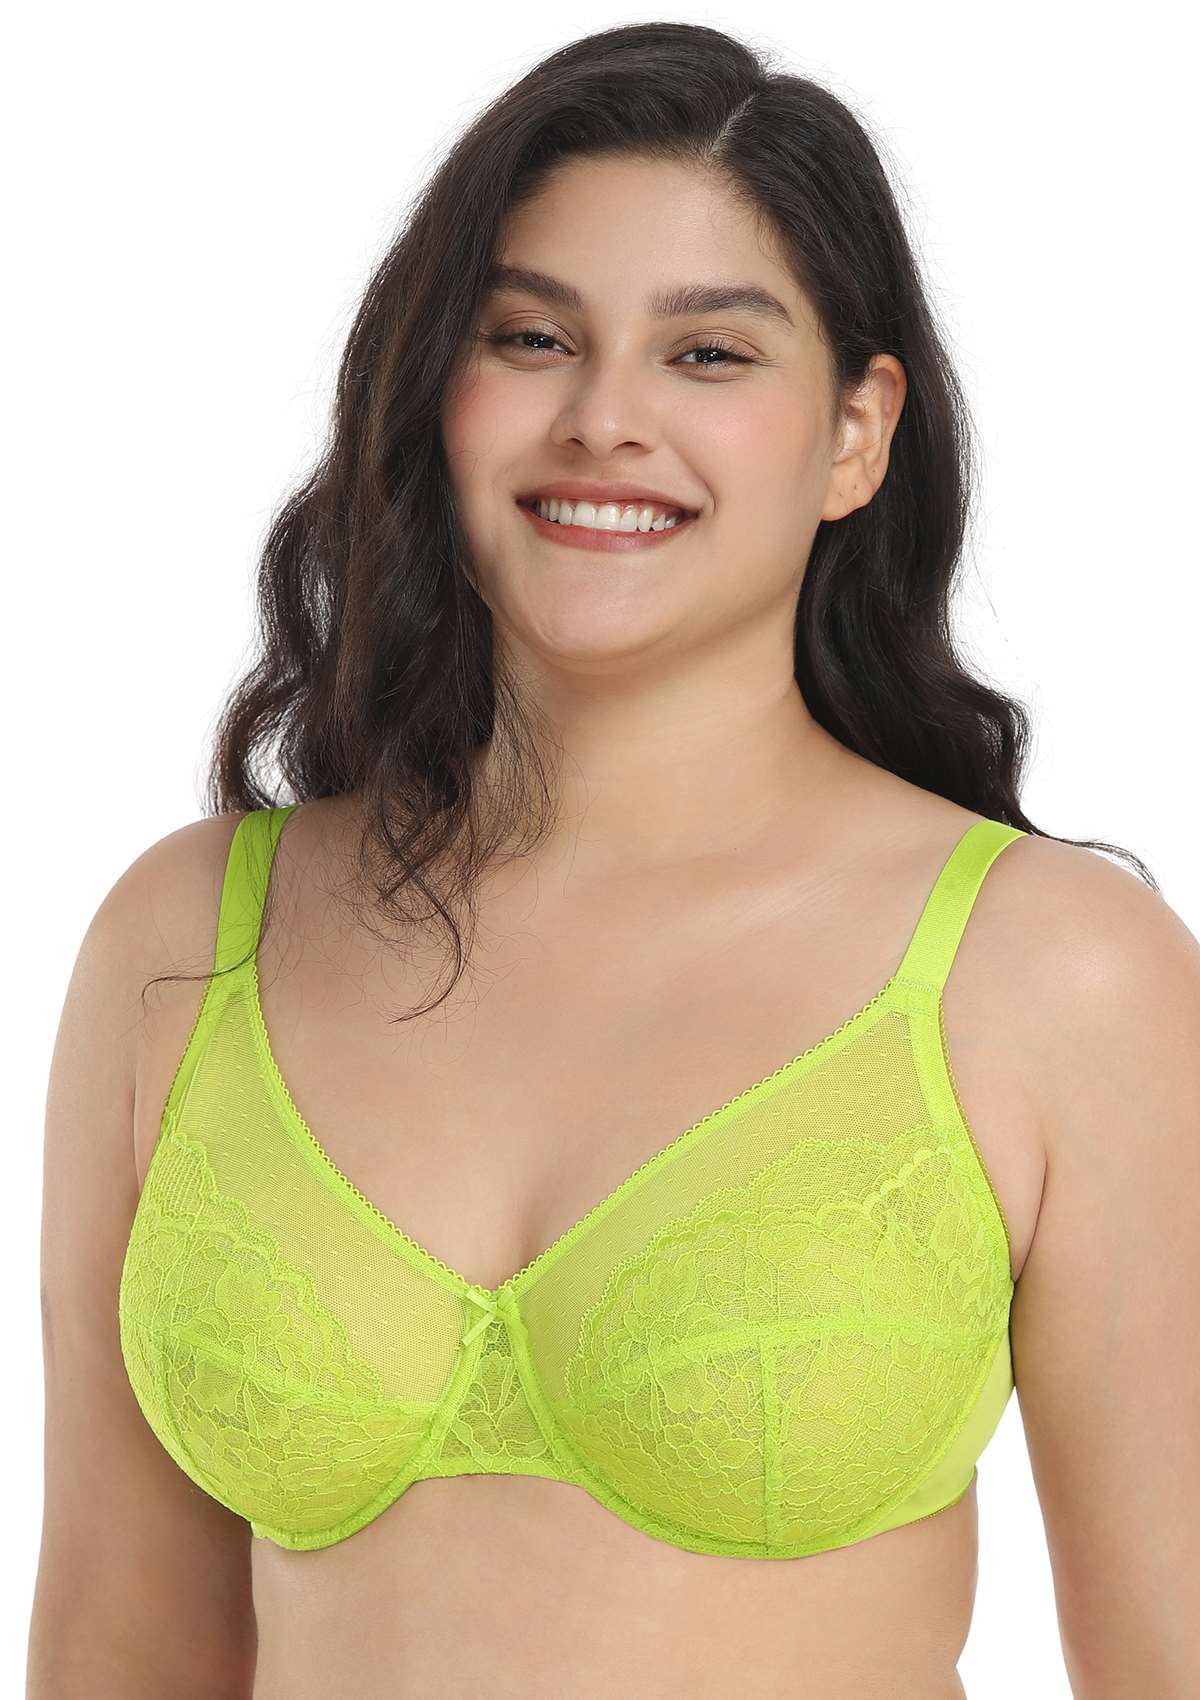 HSIA Enchante Full Cup Minimizing Bra: Supportive Unlined Lace Bra - Lime Green / 46 / D